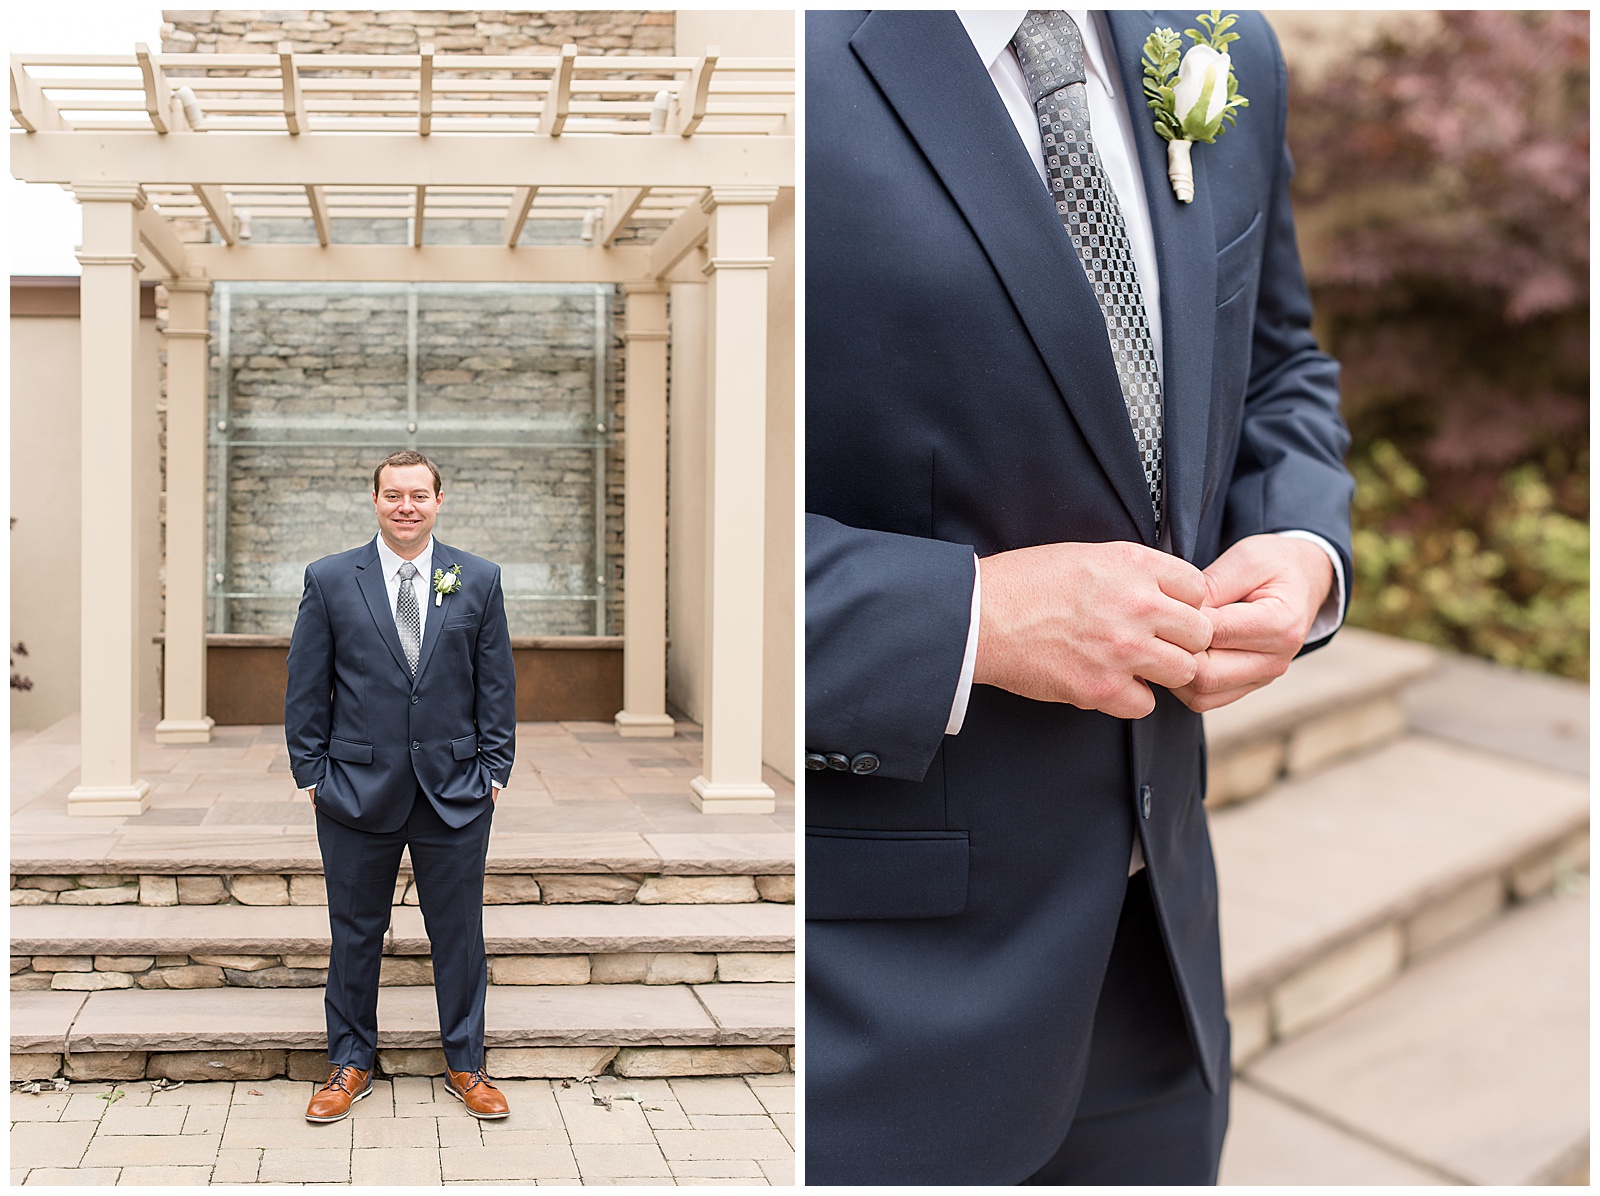 groom in navy suit by wooden trellis and stone steps at eden resort